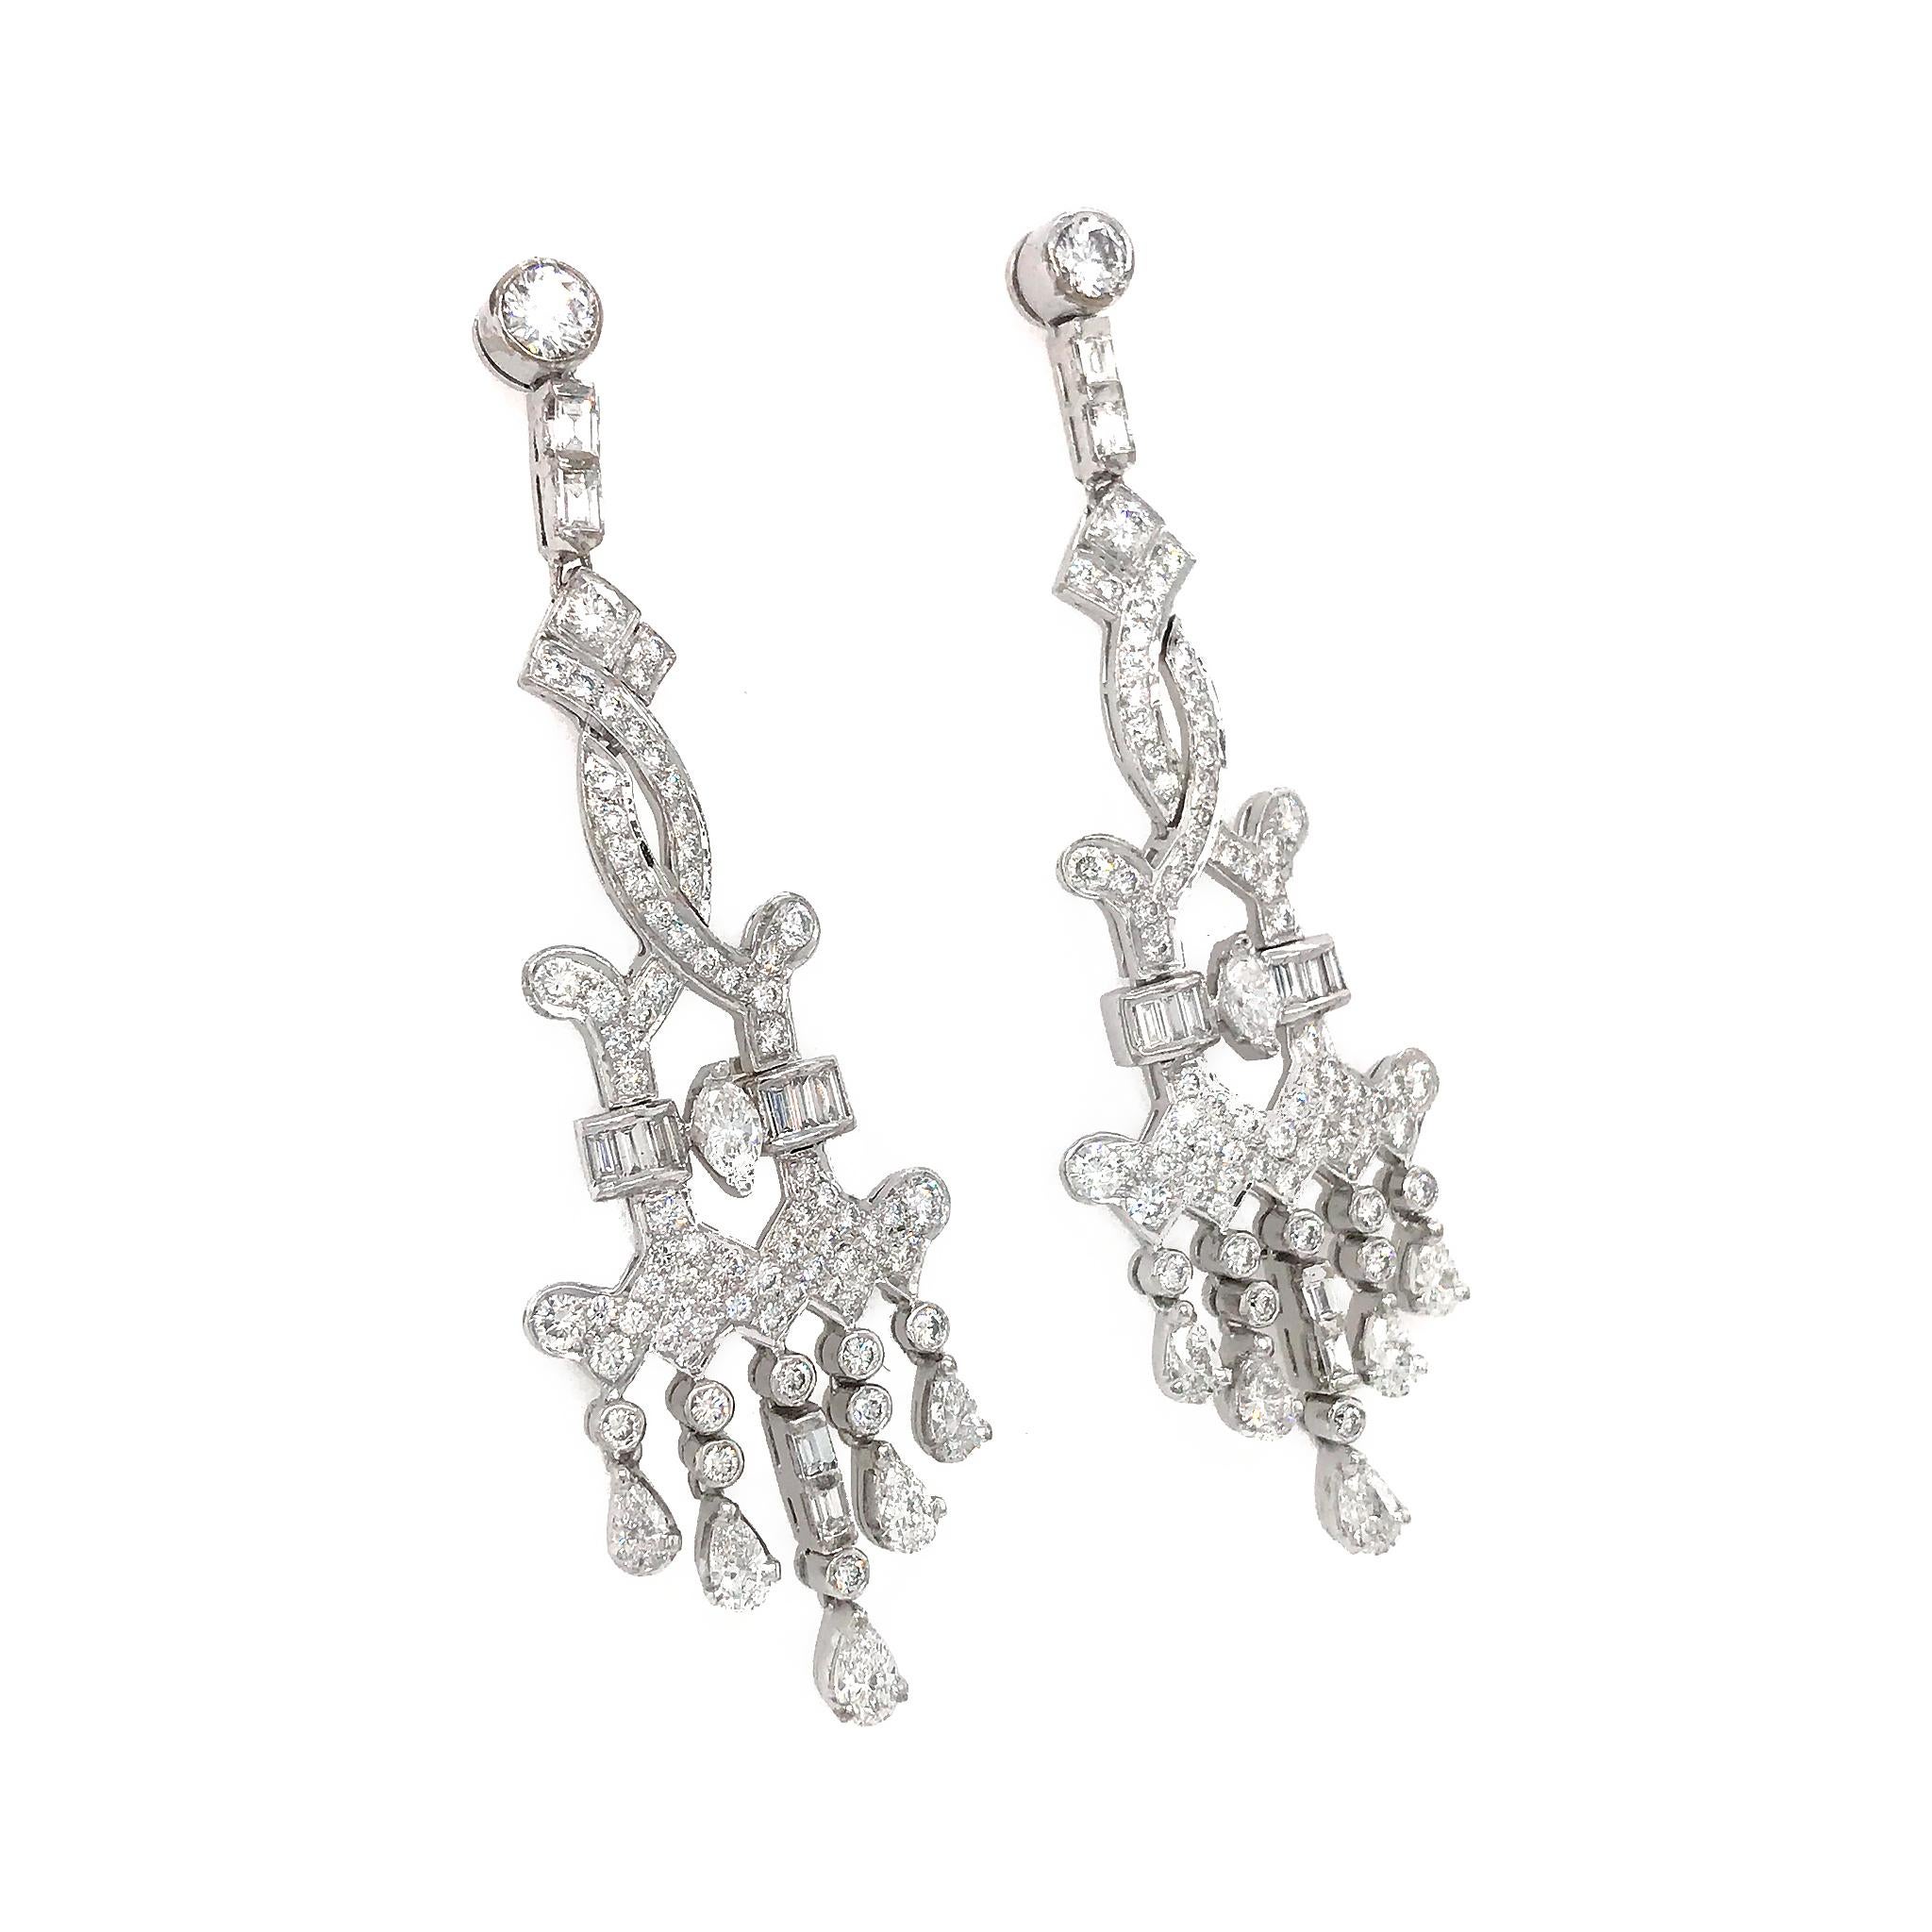 METAL TYPE: 14k White Gold
STONE WEIGHT: 2.75ct twd
TOTAL WEIGHT: 16.1 grams
EARRINGS LENGTH: 2.5 inches